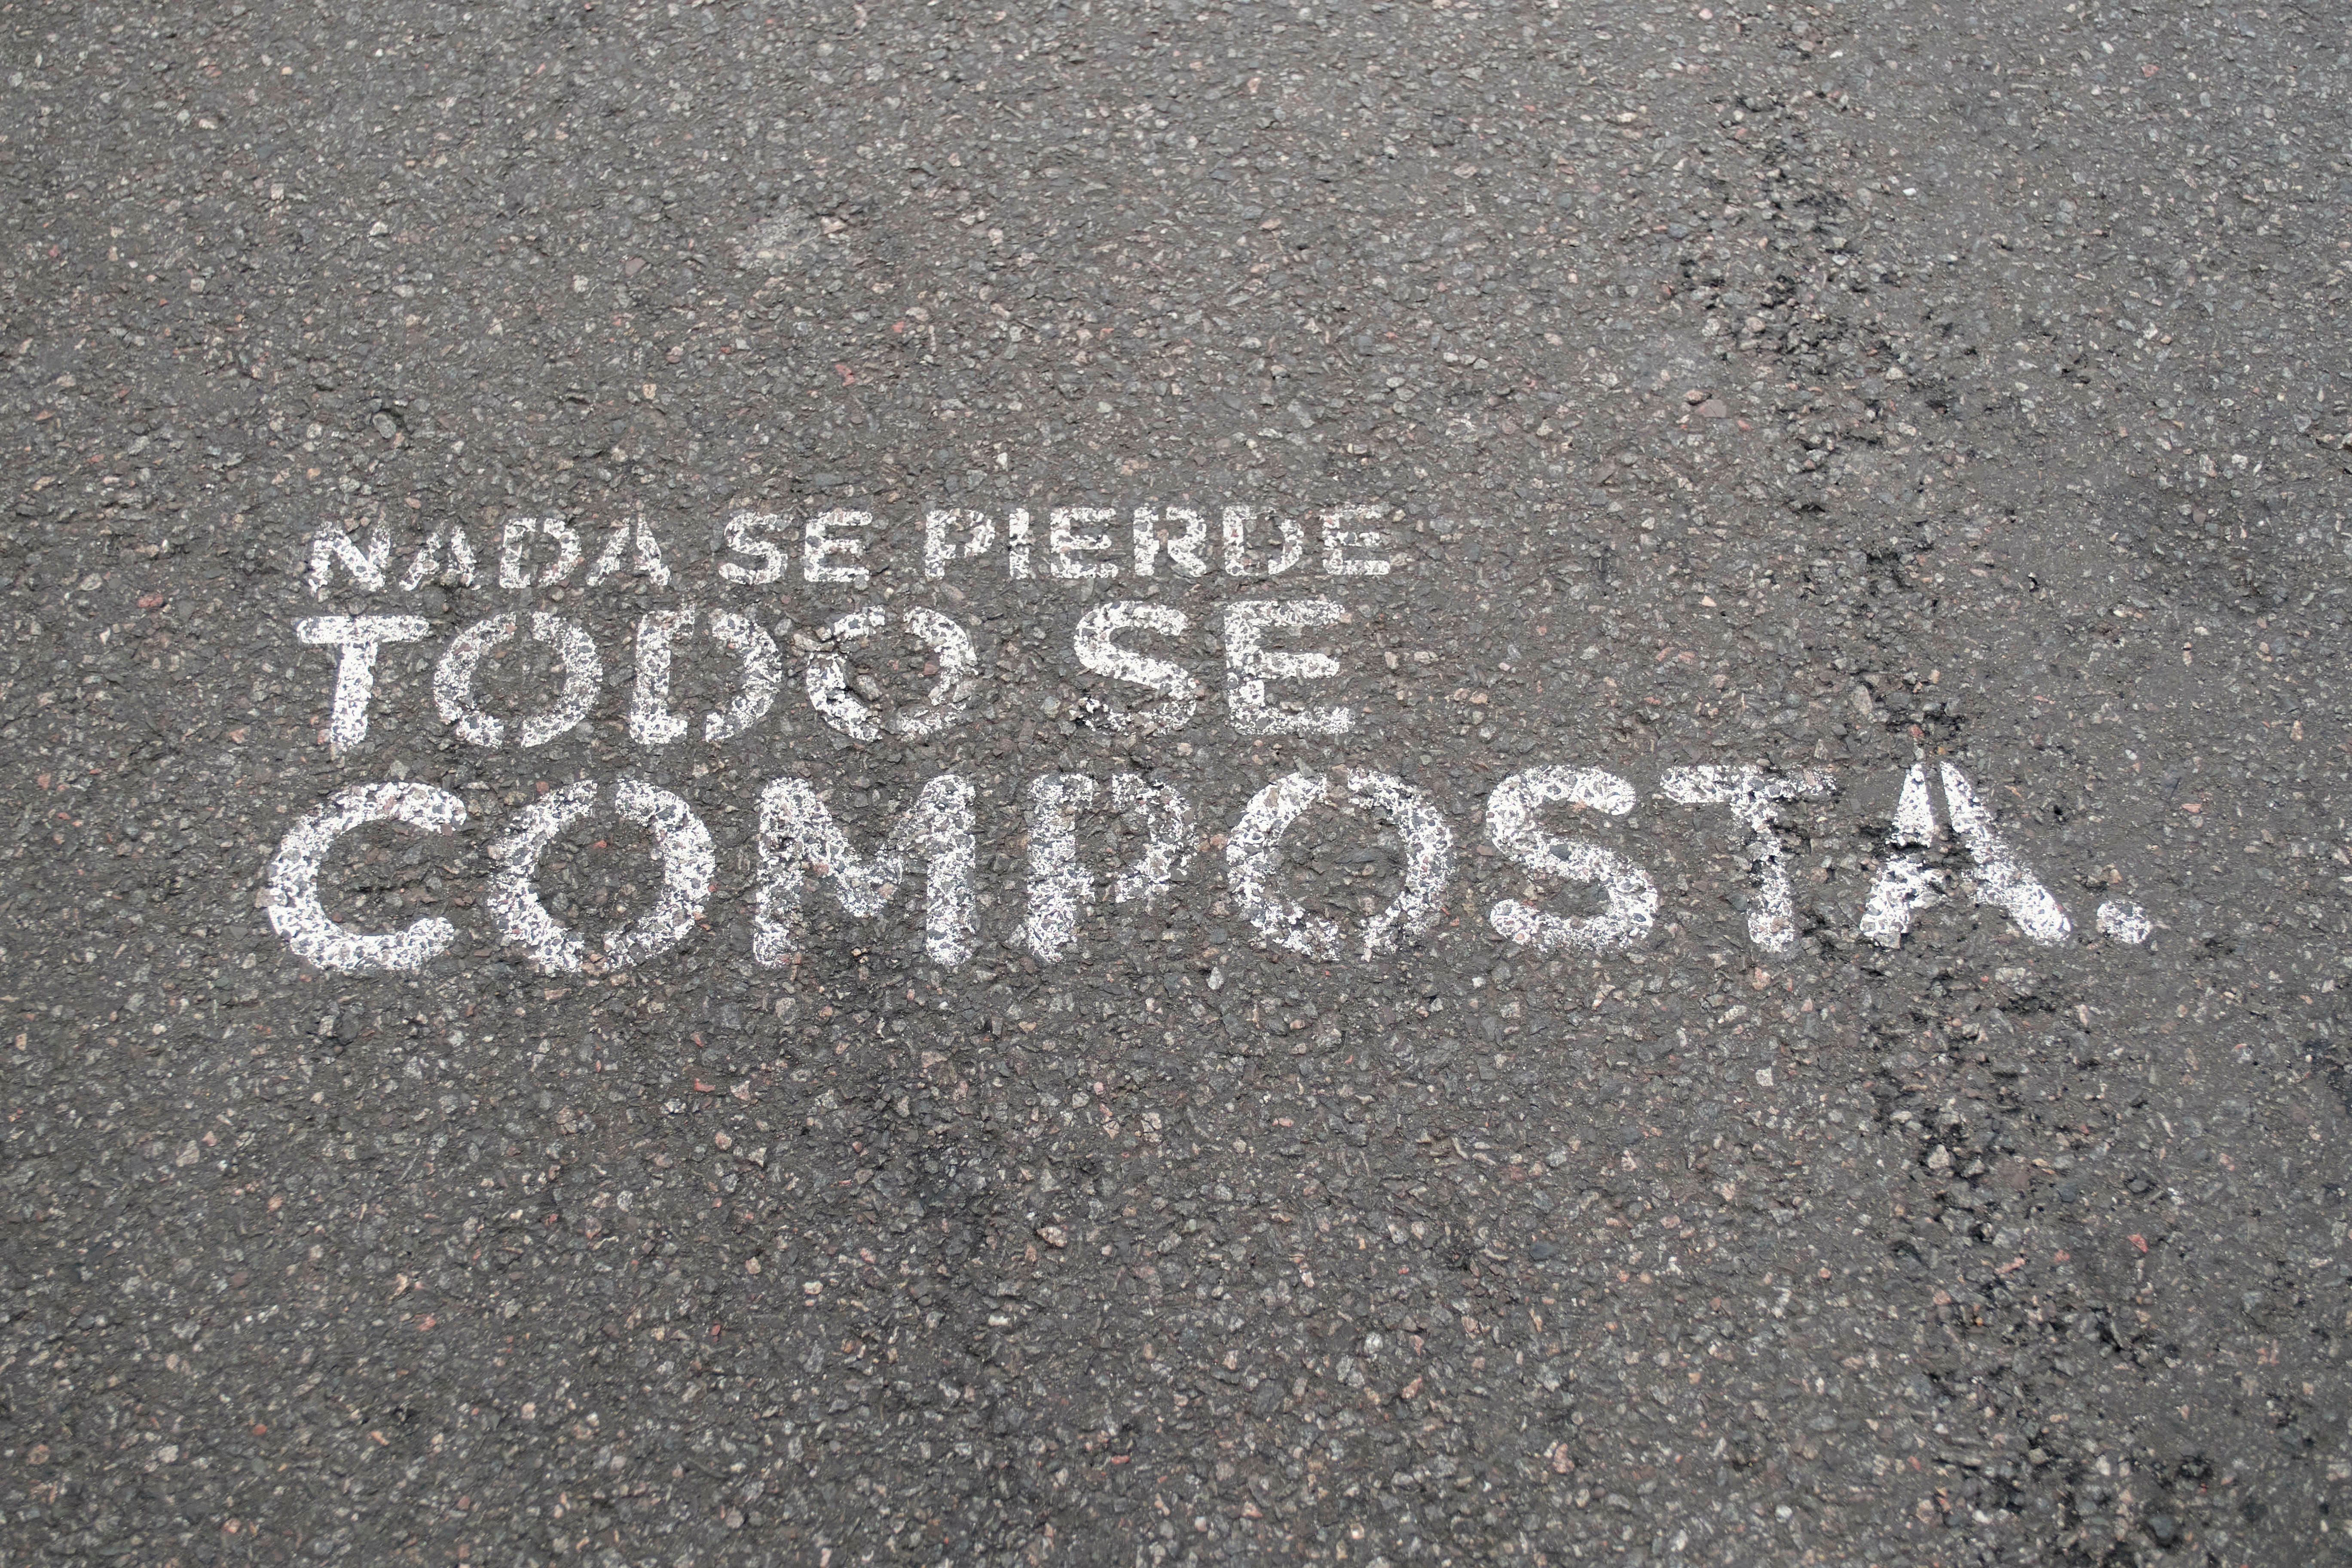 A message written on a street says, 